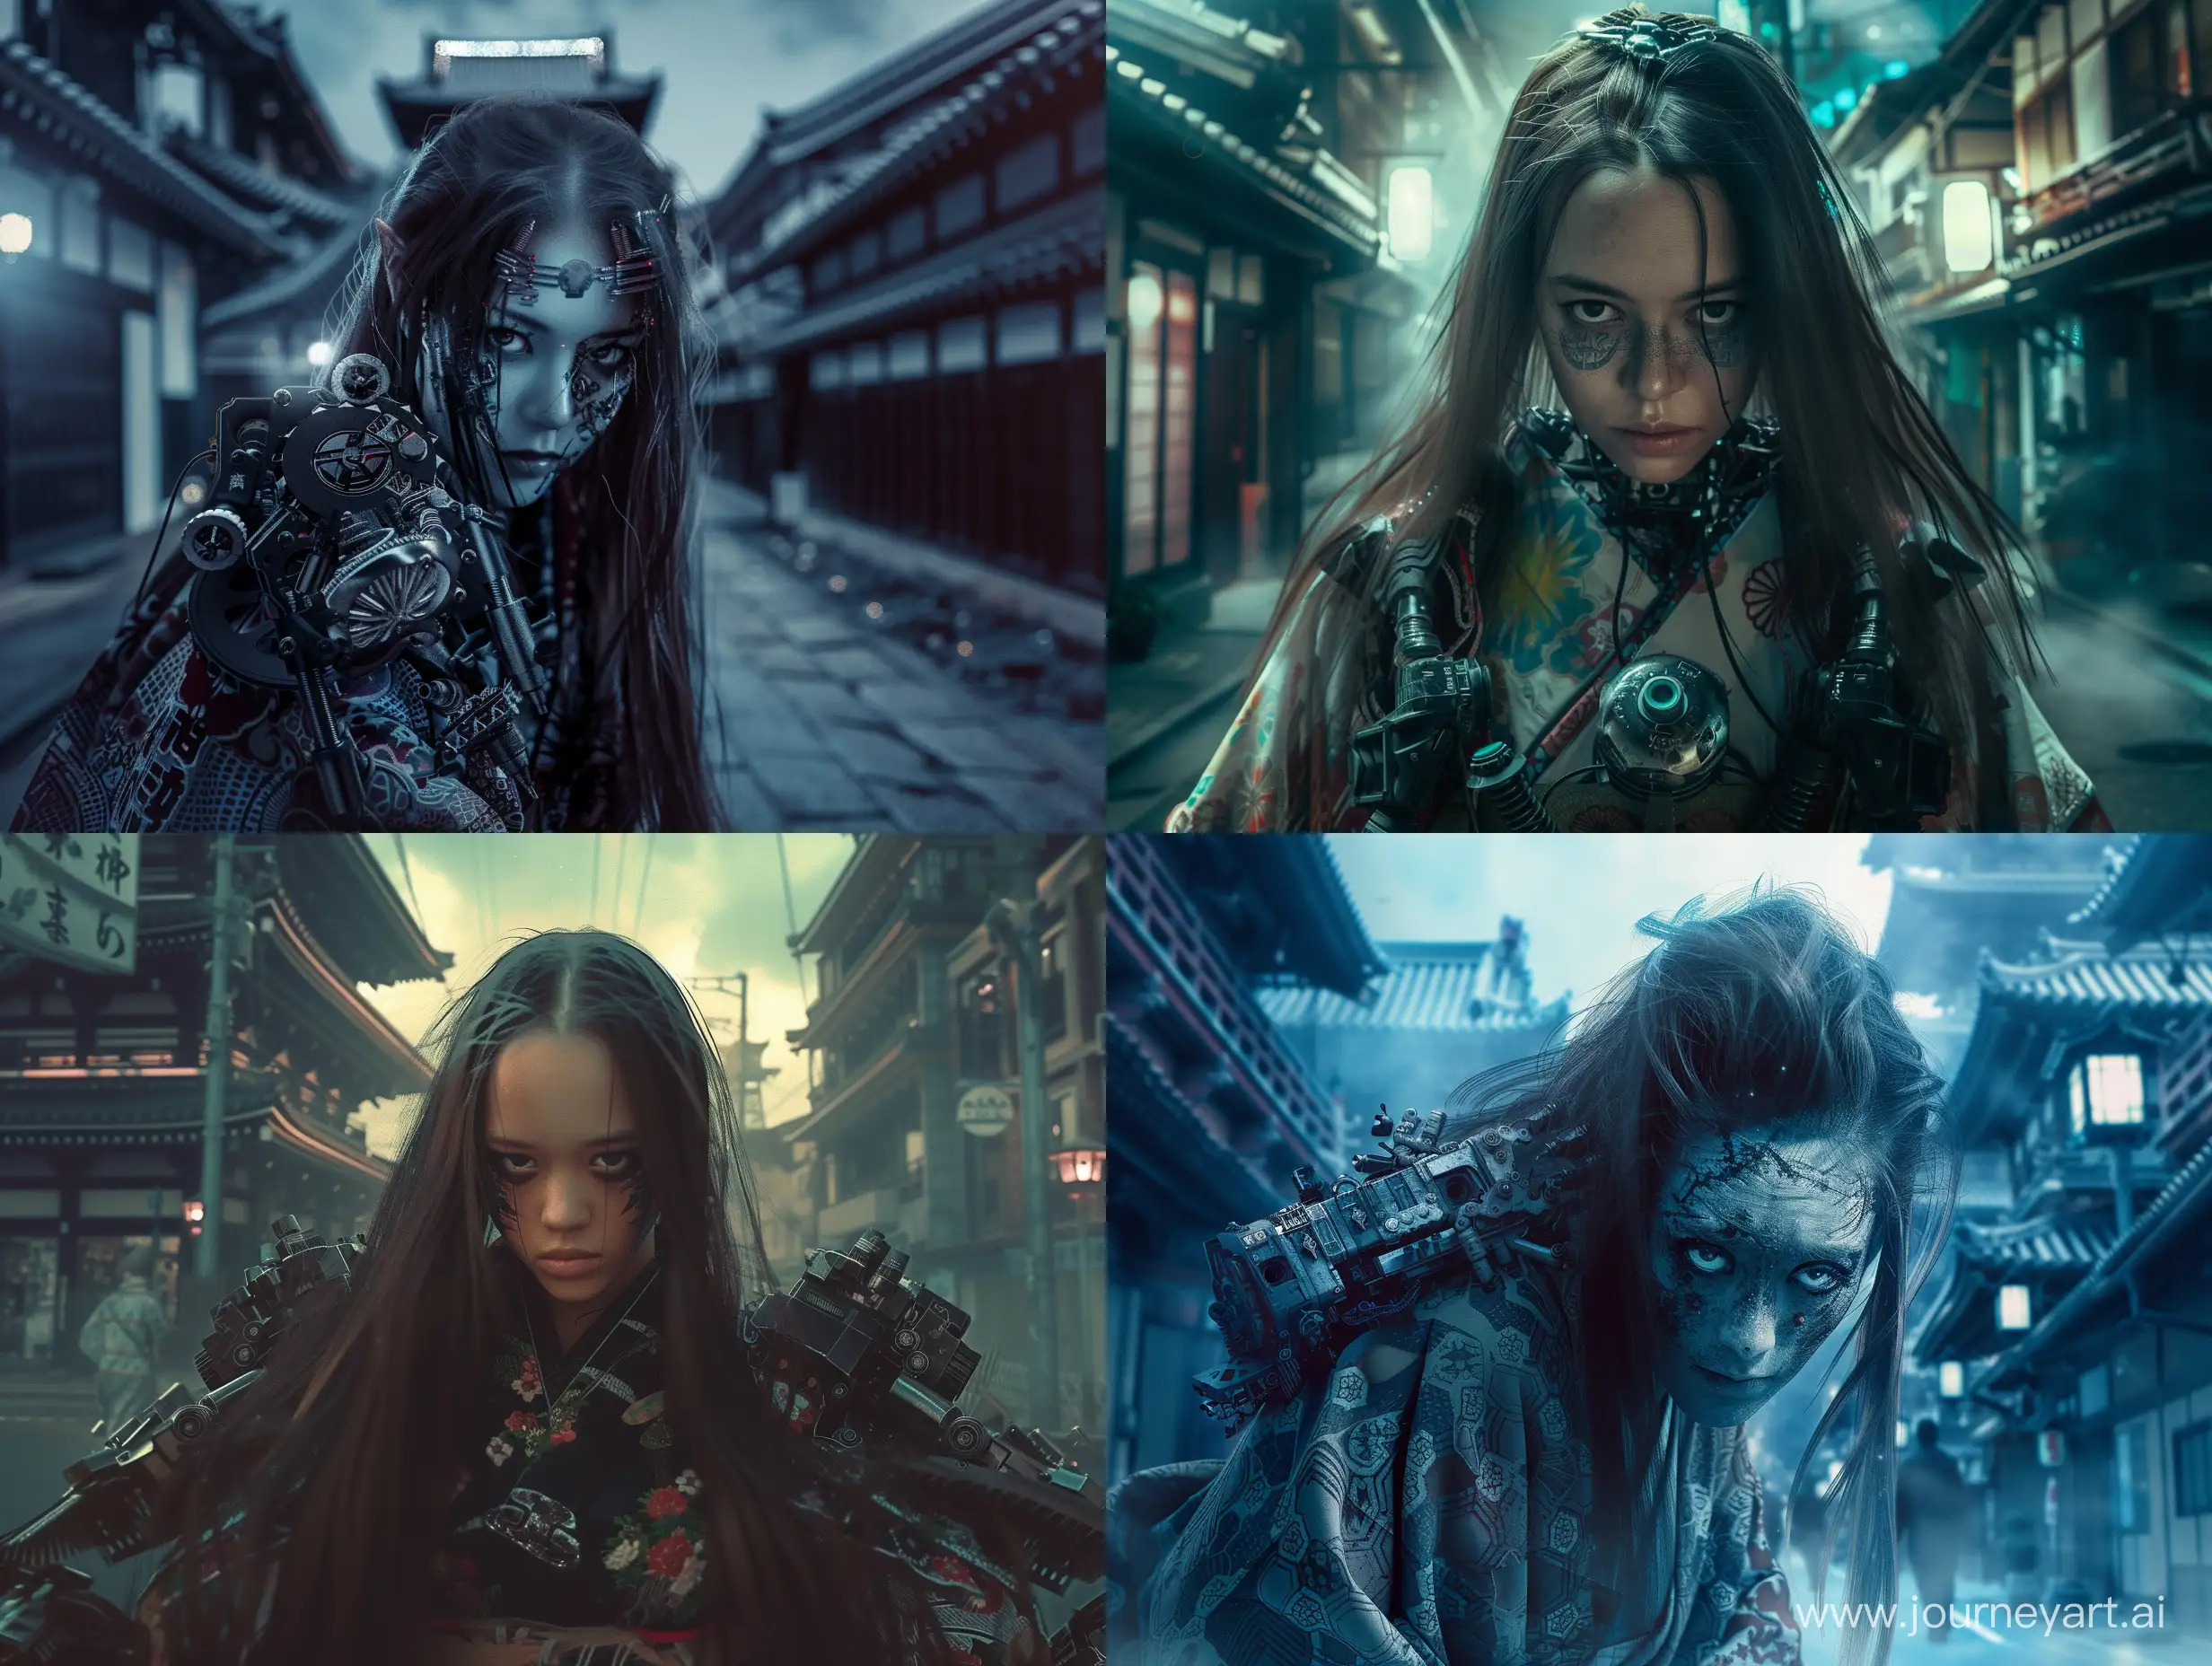 Cyberpunk-Japanese-Female-Monster-with-Mechanical-Enhancements-in-Futuristic-Cityscape